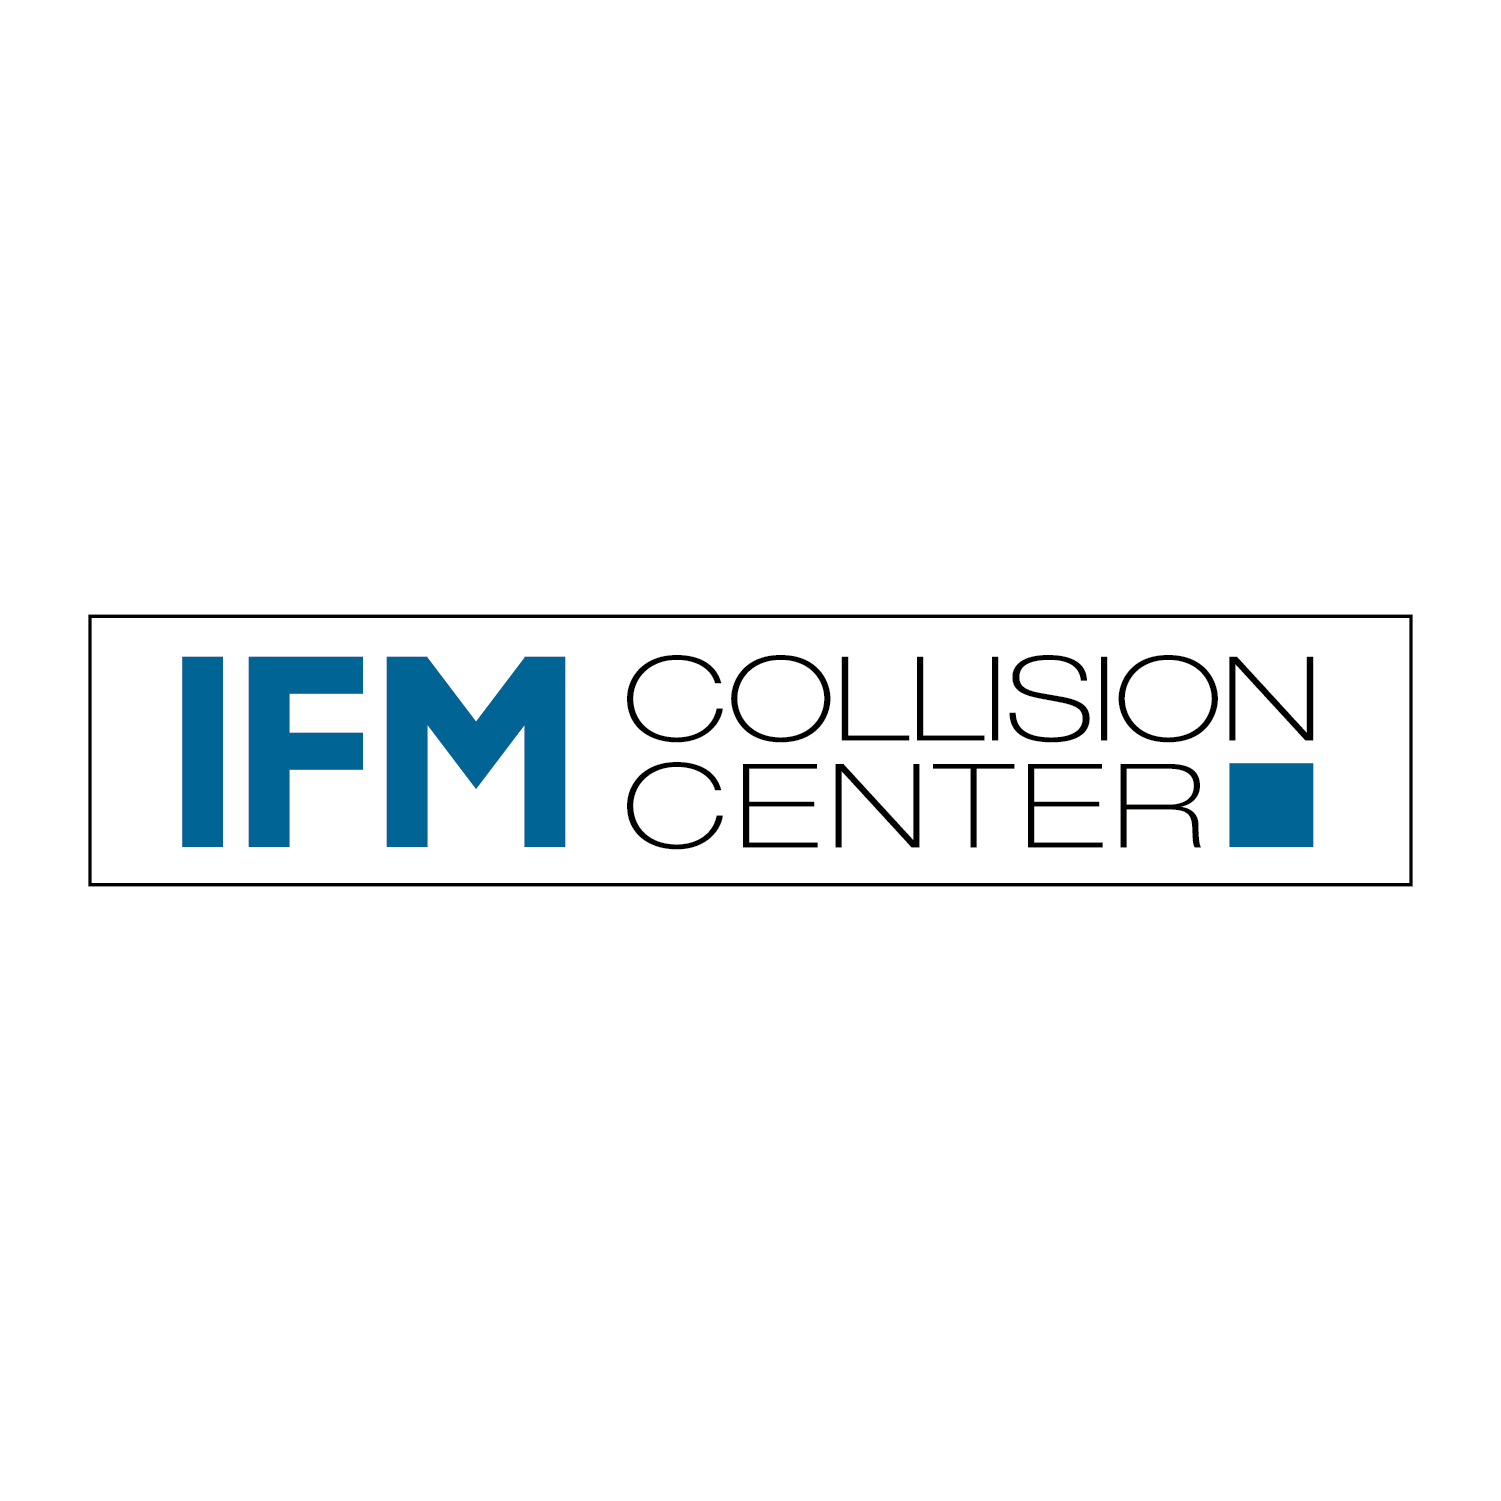 IFM Collision Center - Bedford Hills, NY 10507 - (914)666-4876 | ShowMeLocal.com